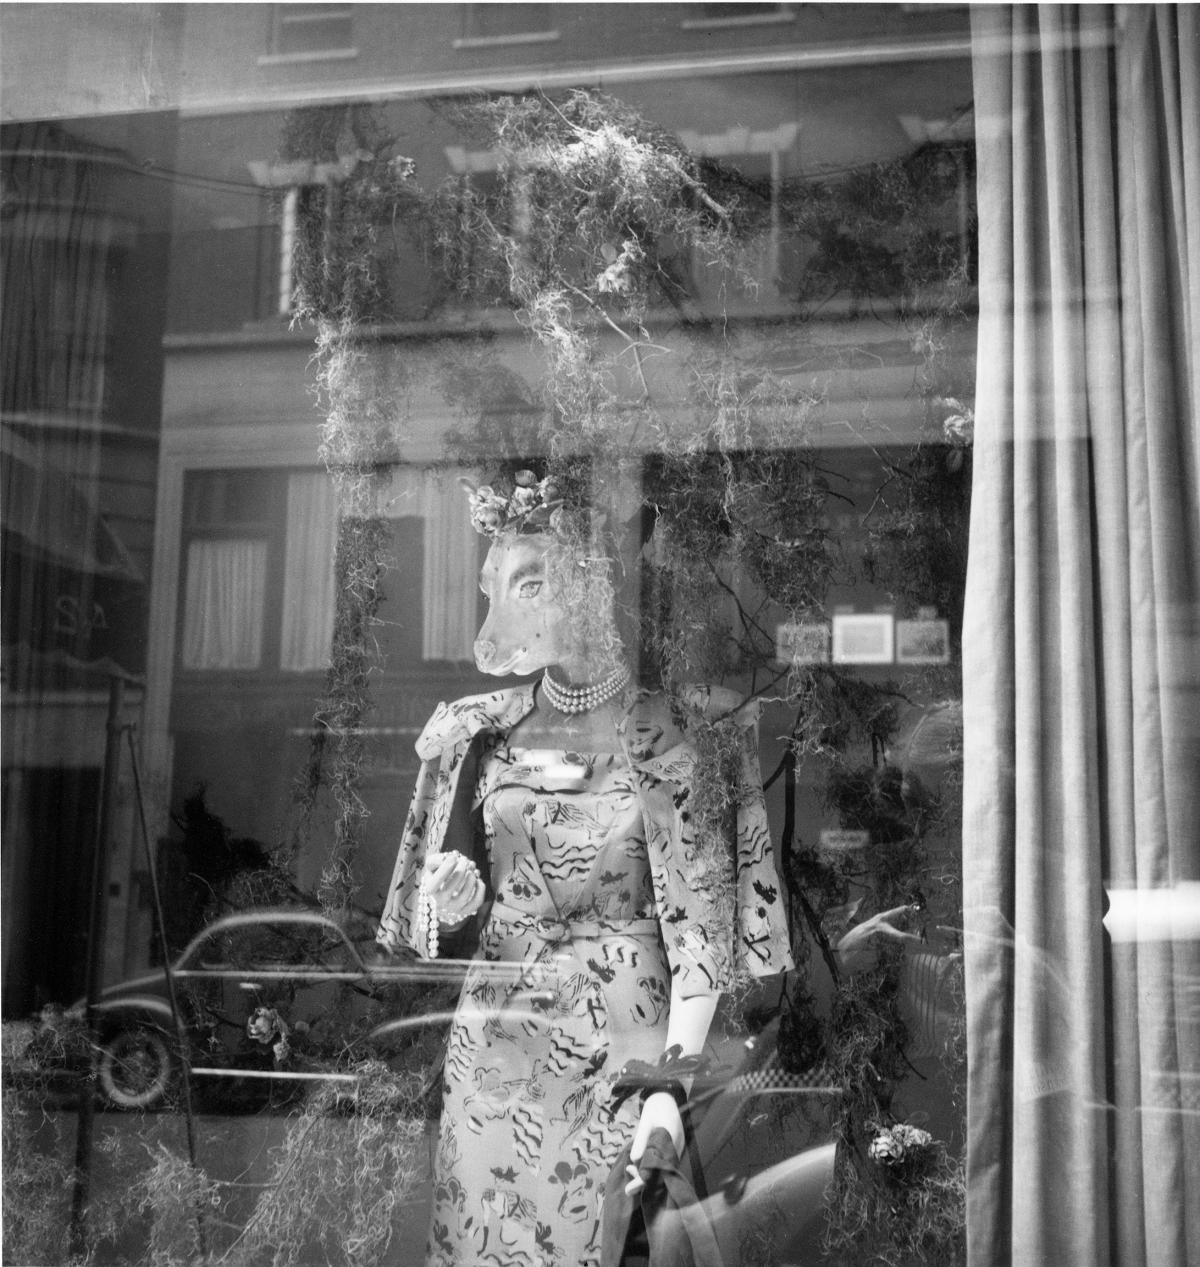 A cow-headed mannequin wears a floral dress and matching jacket in a shop window